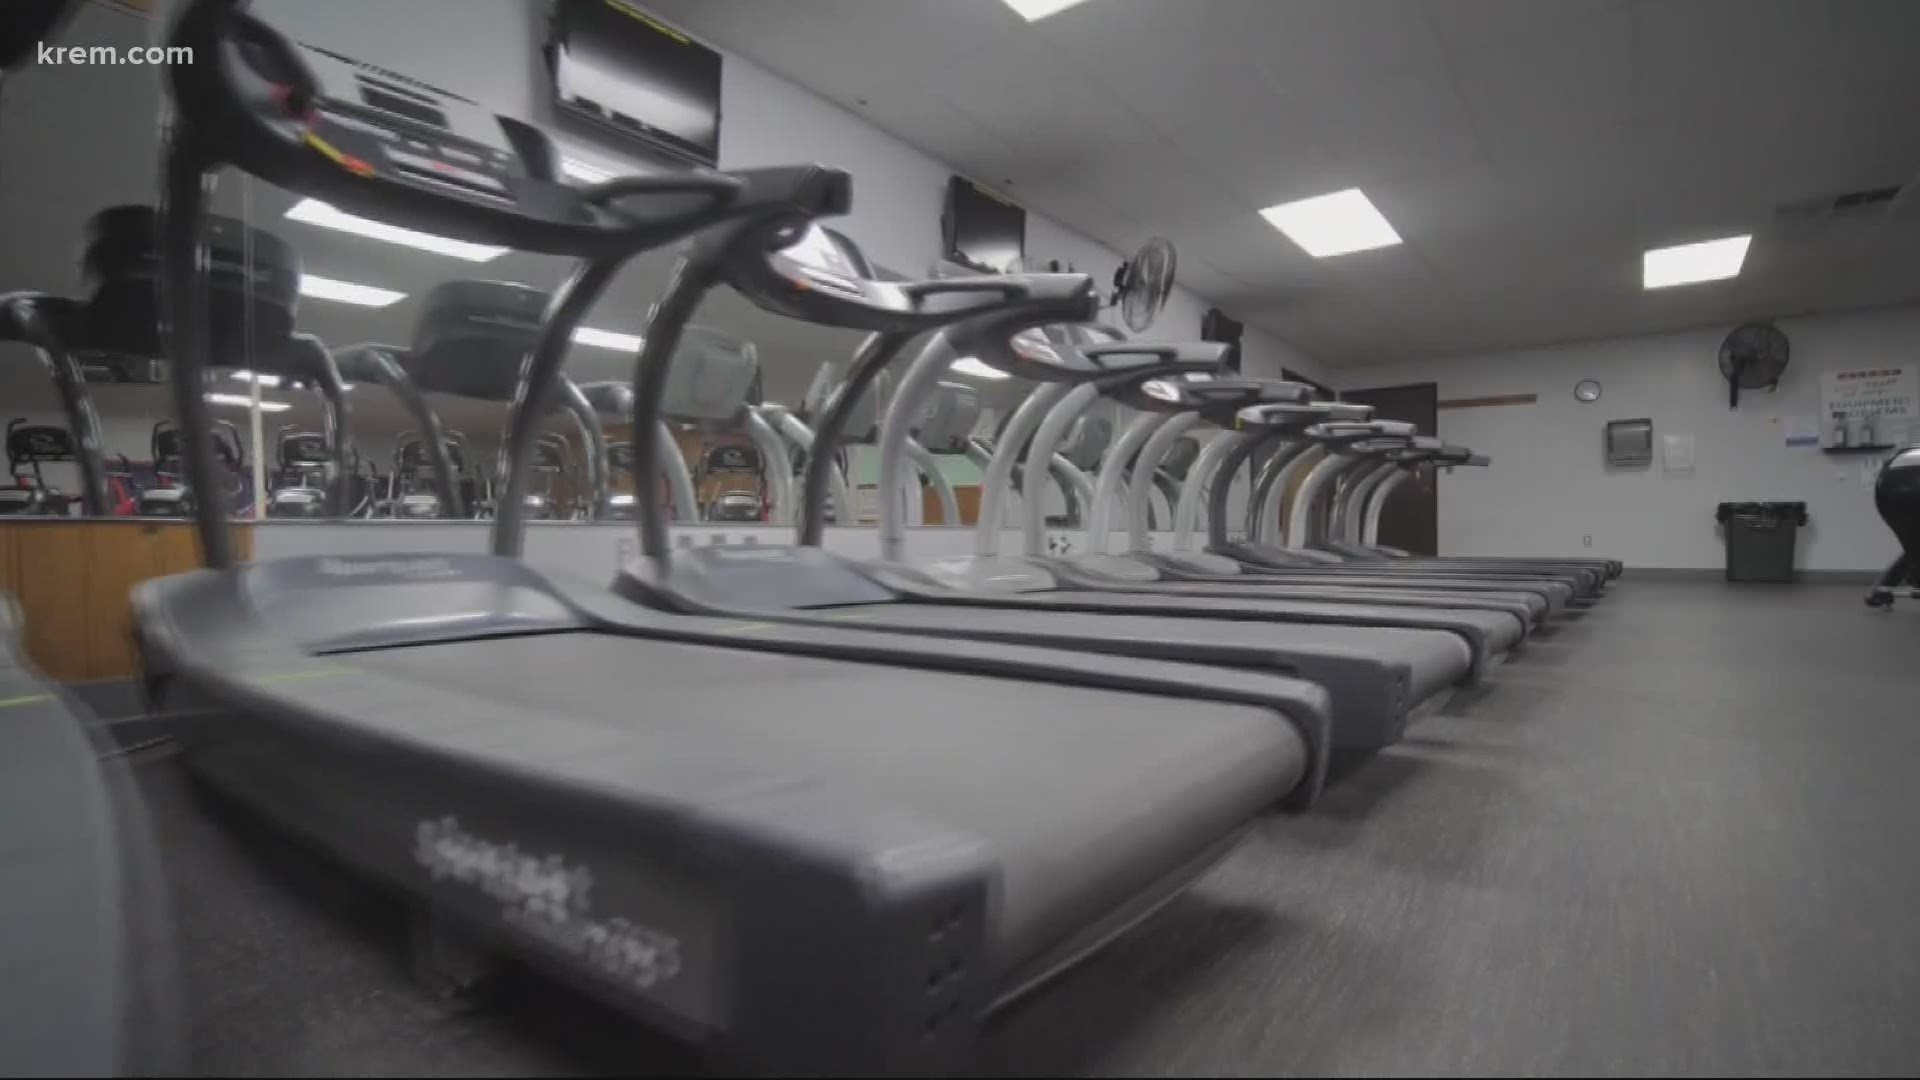 New regulations are being added to fitness facilities in order to combat rising Spokane coronavirus cases.